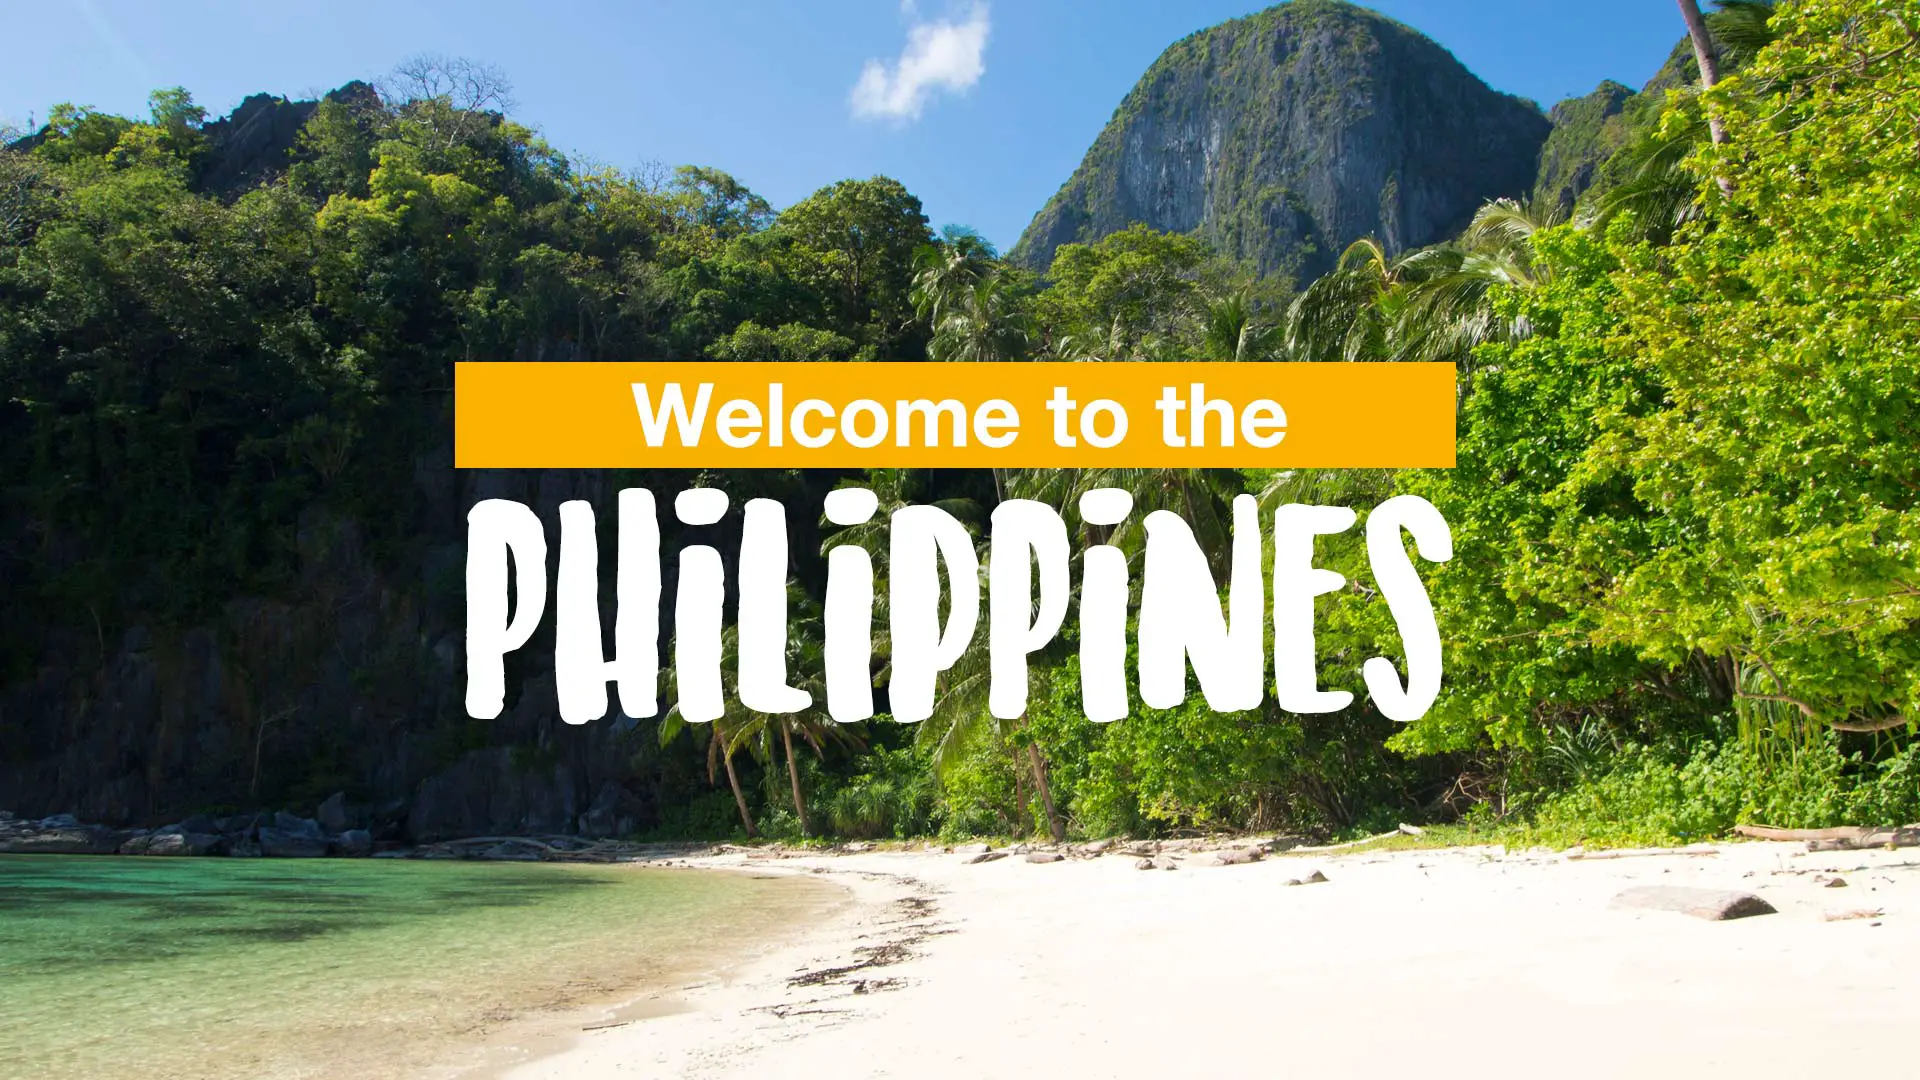 “Travel Attractions in the Philippines”